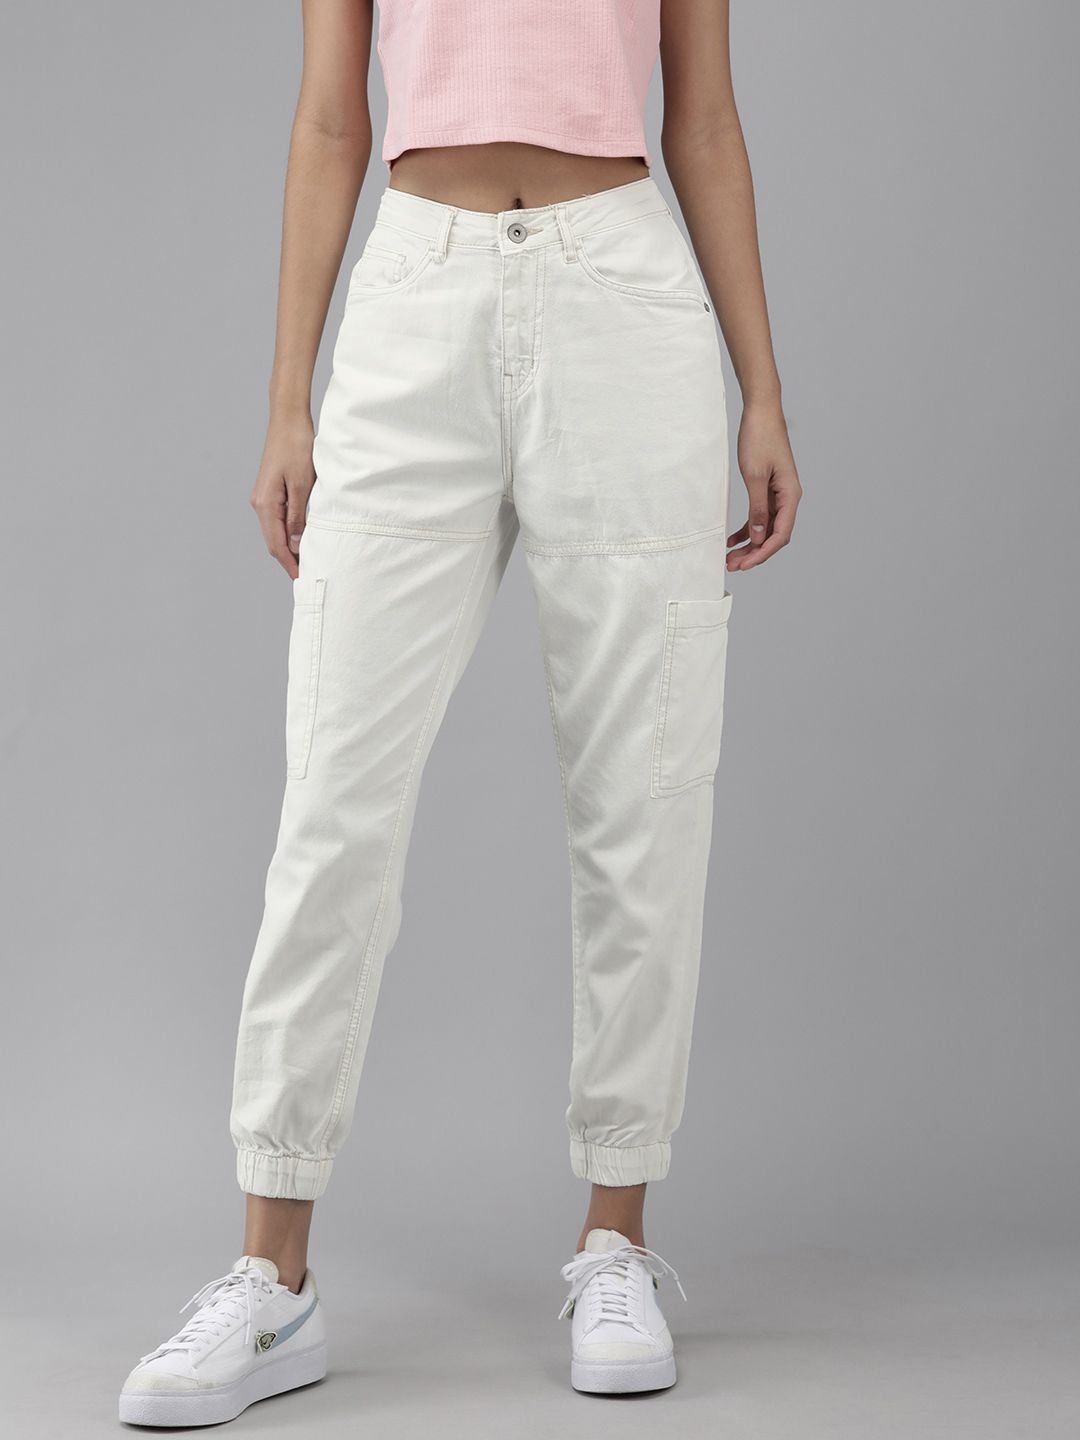 The Roadster Lifestyle Co Women White Jogger Jeans Price in India